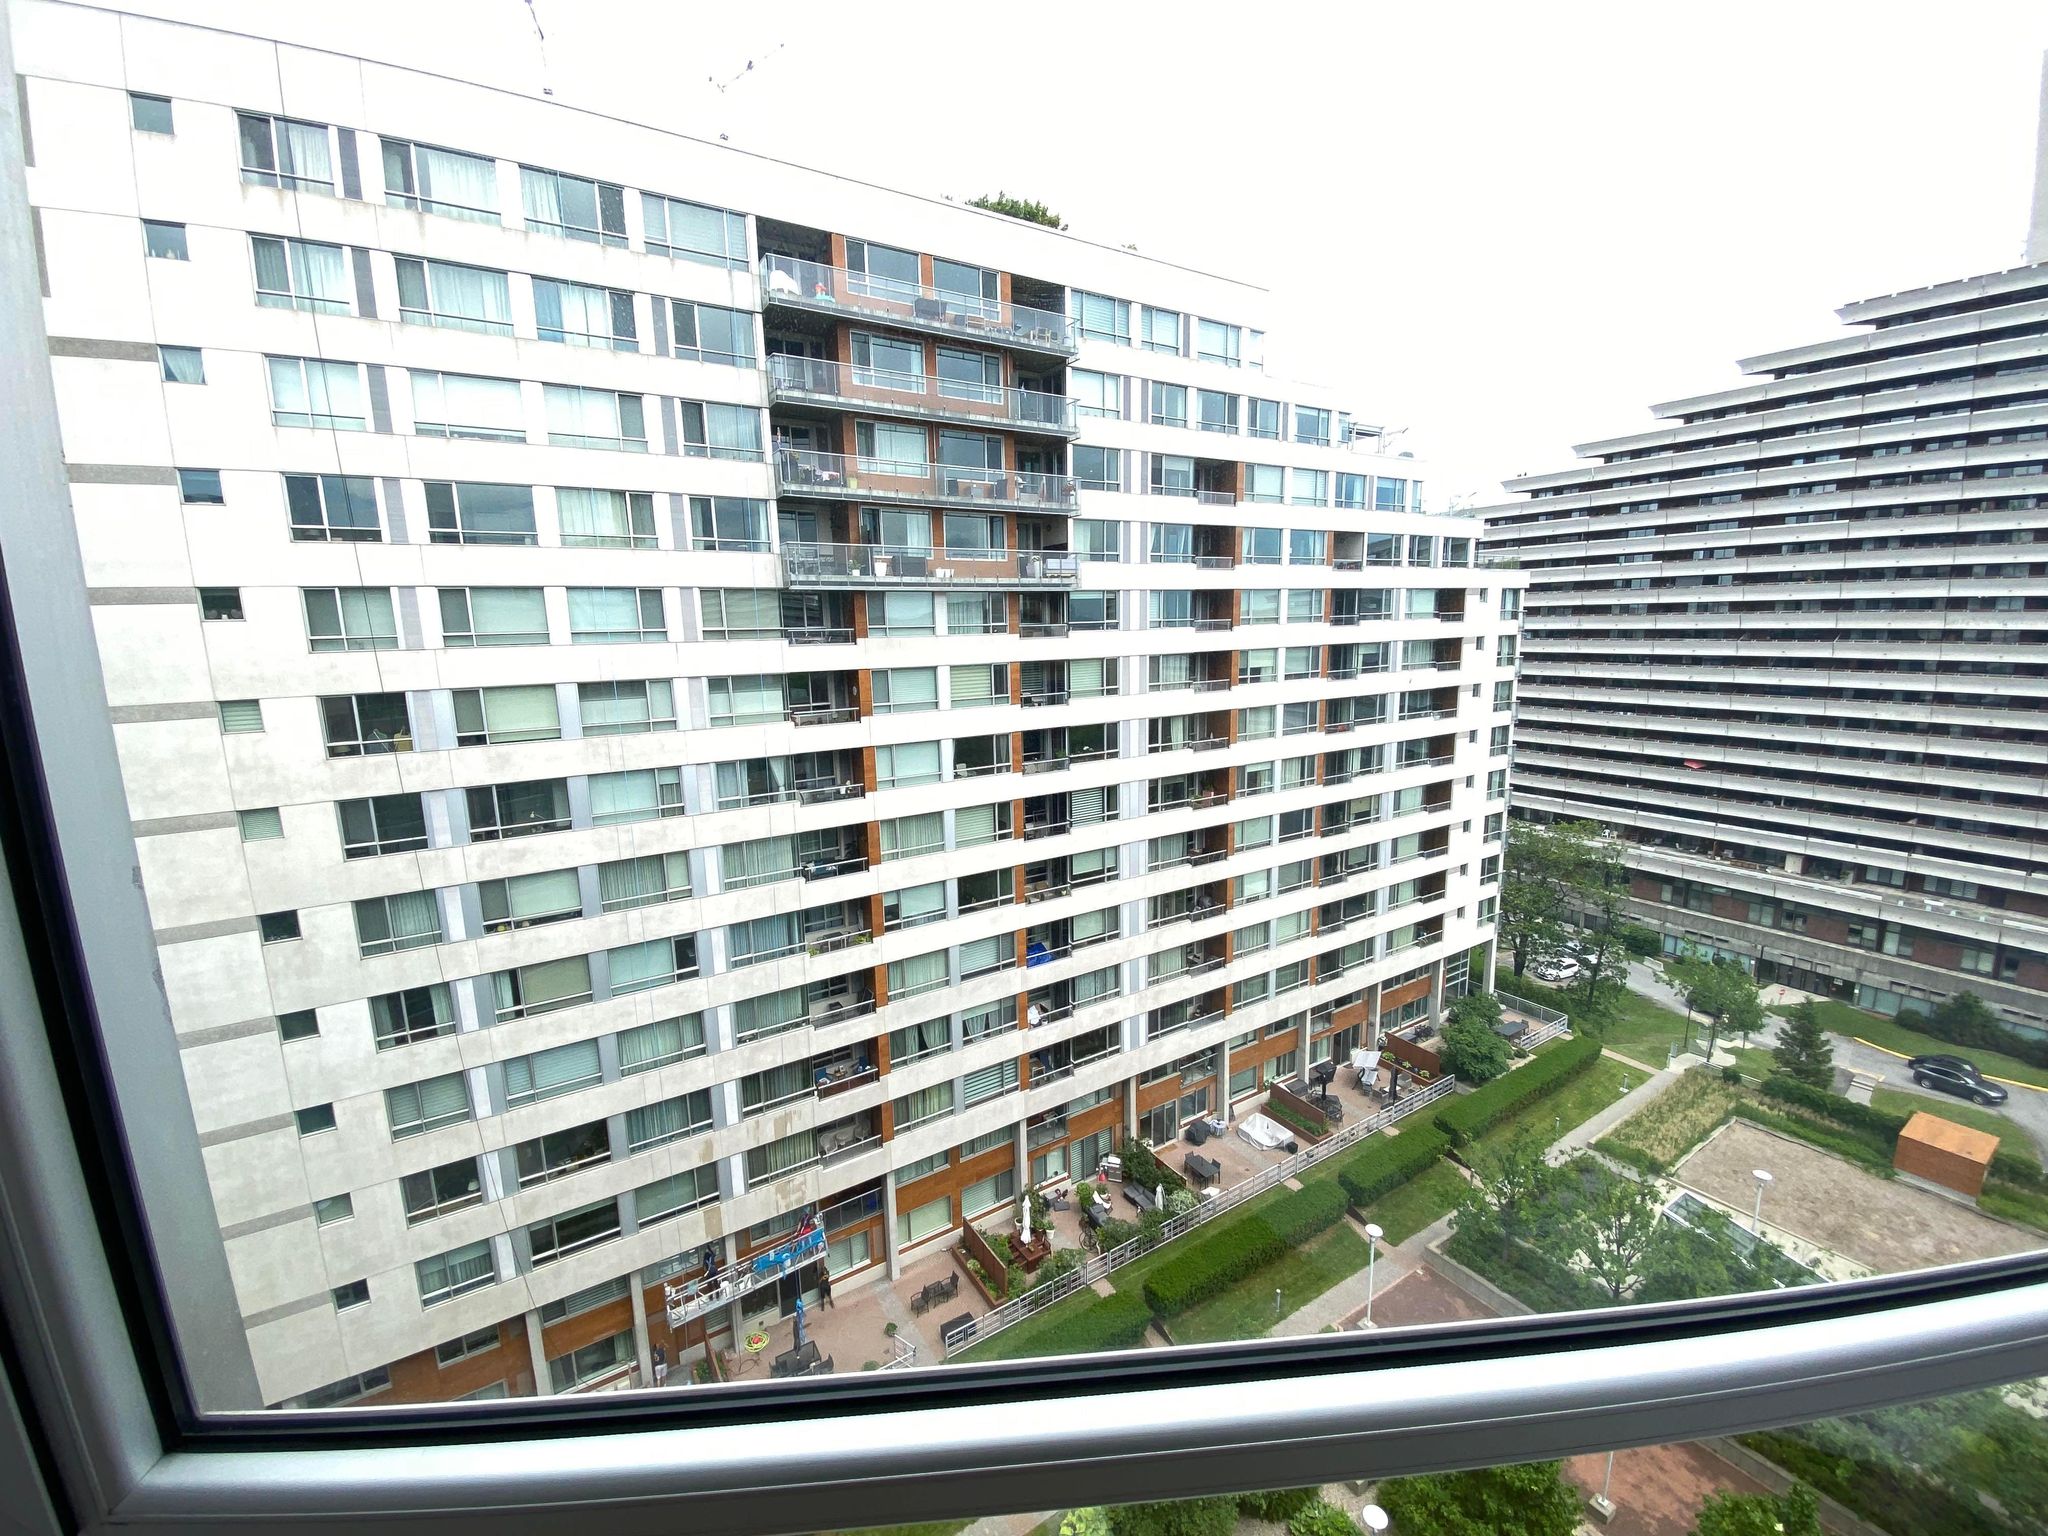 Condo for rent in the Olympic Village